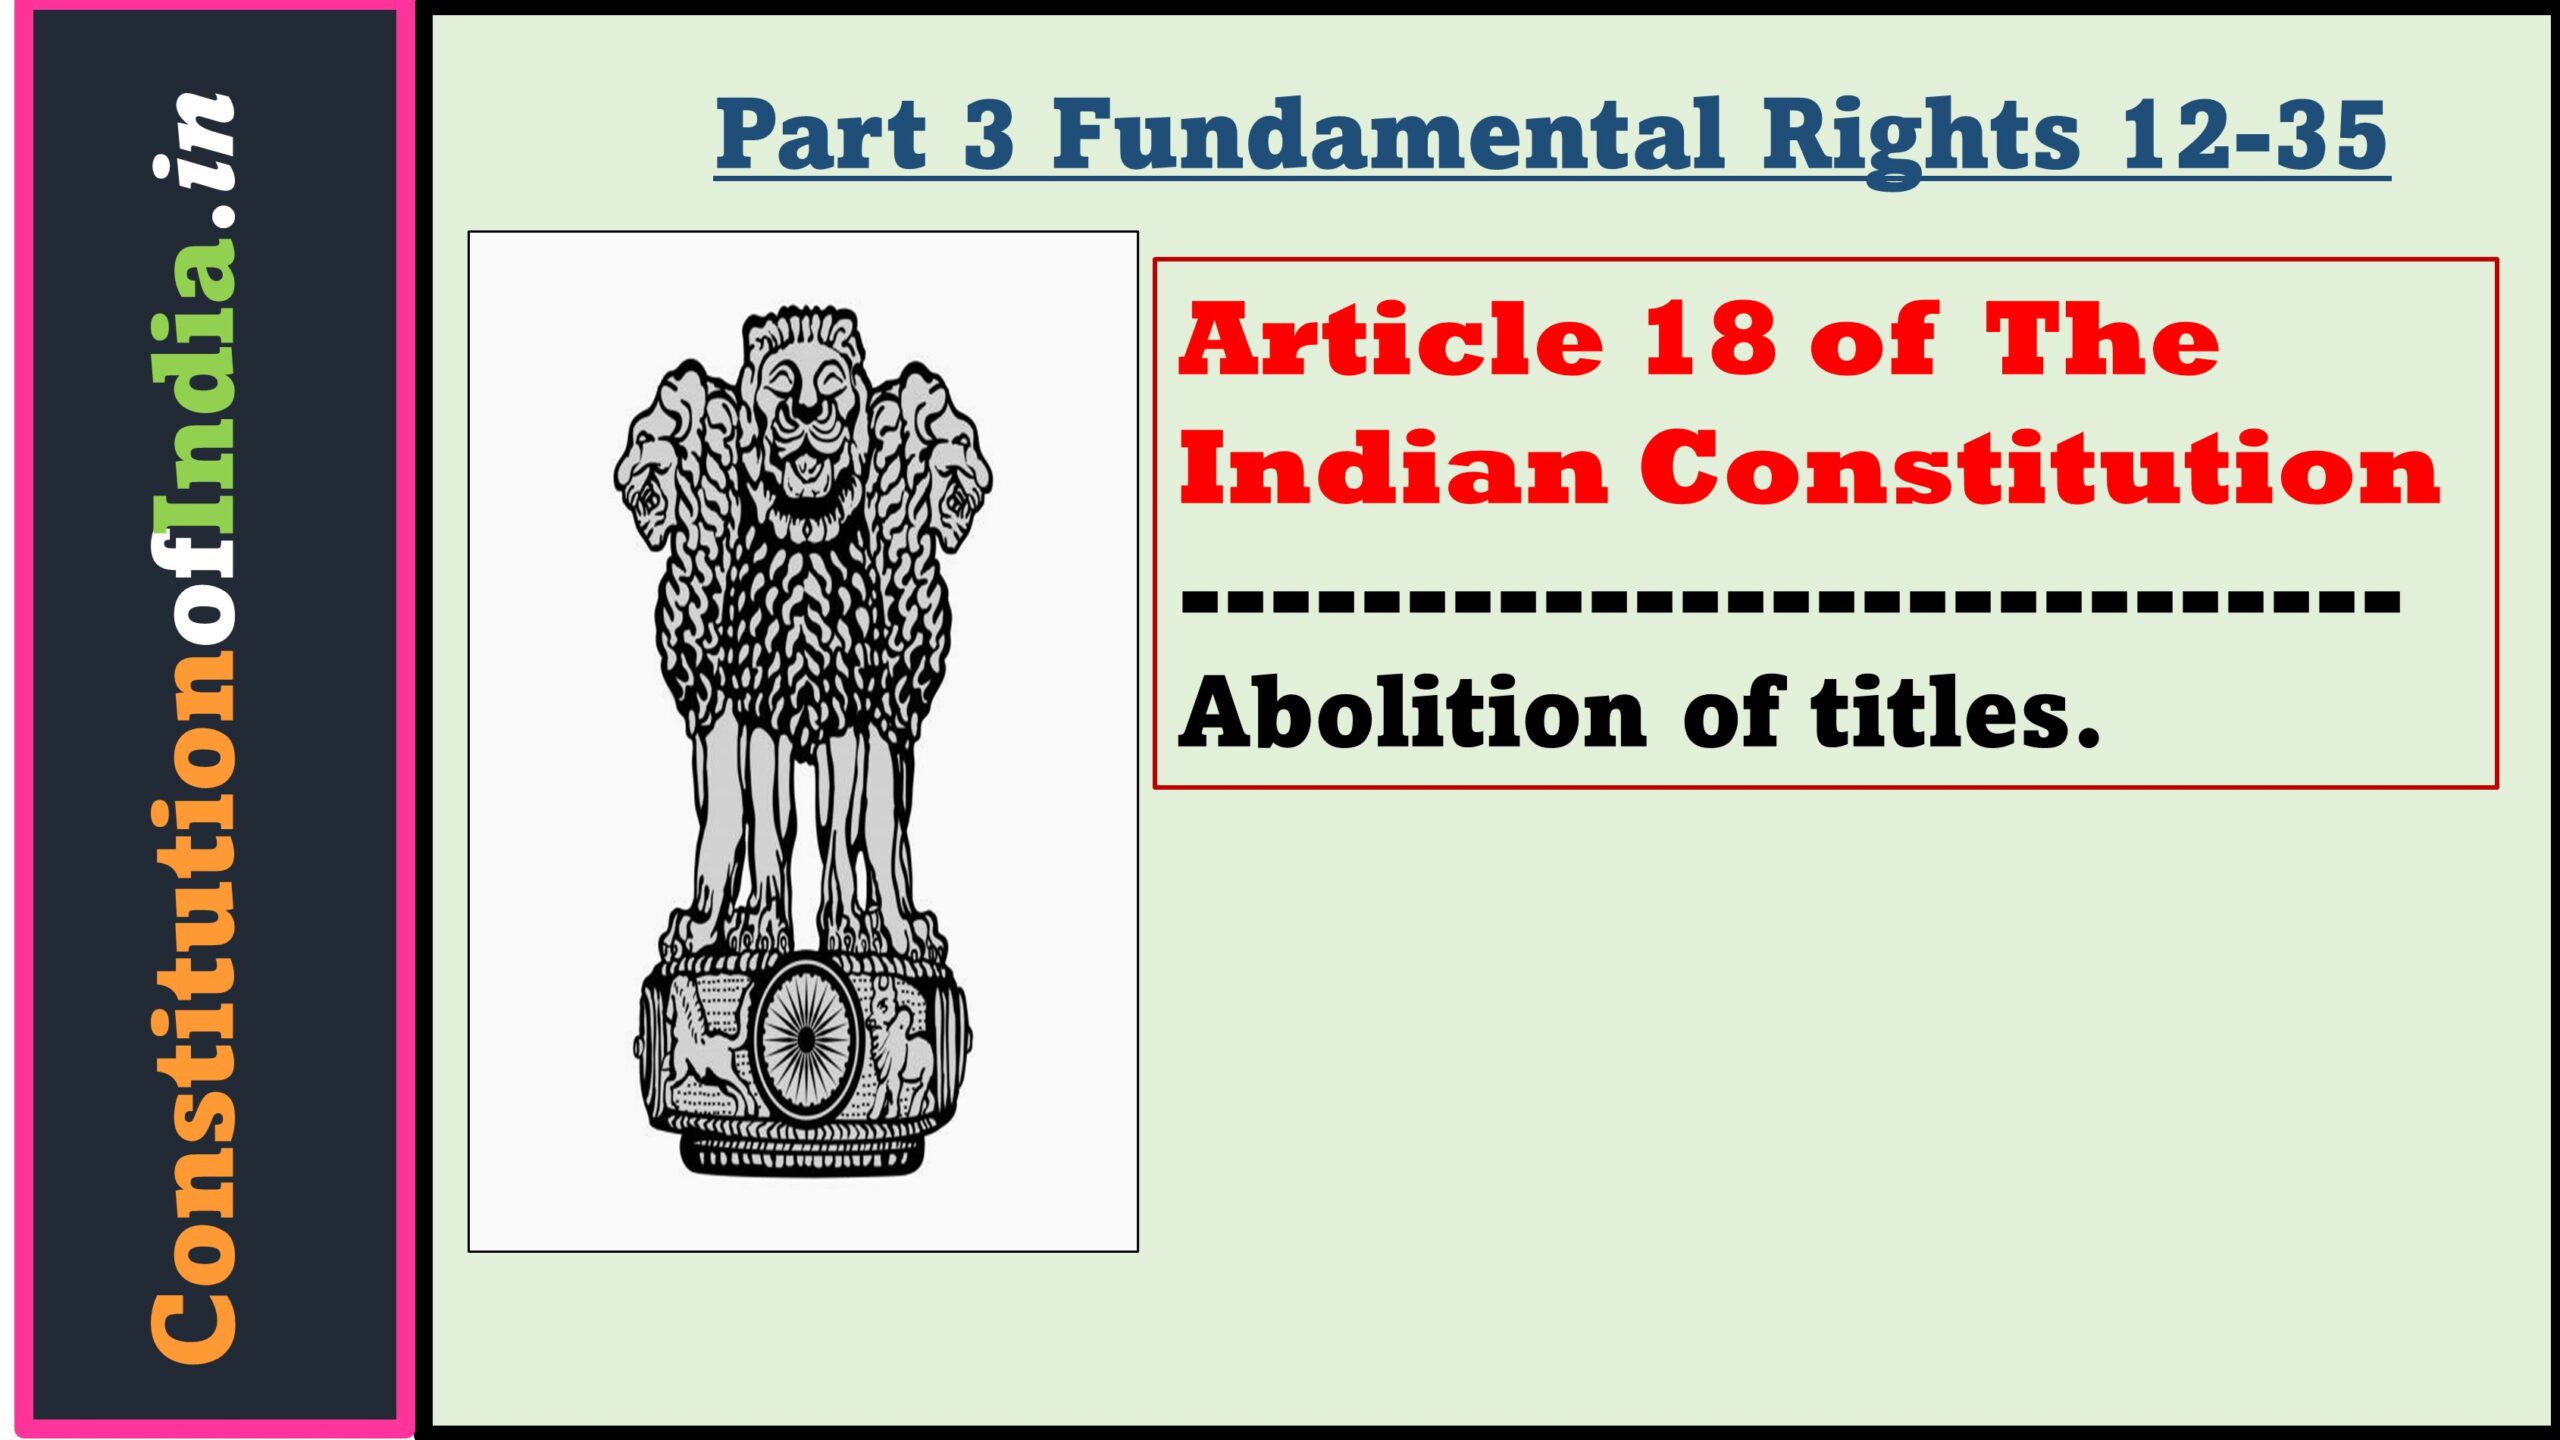 Article 18 of Indian Constitution Abolition of titles